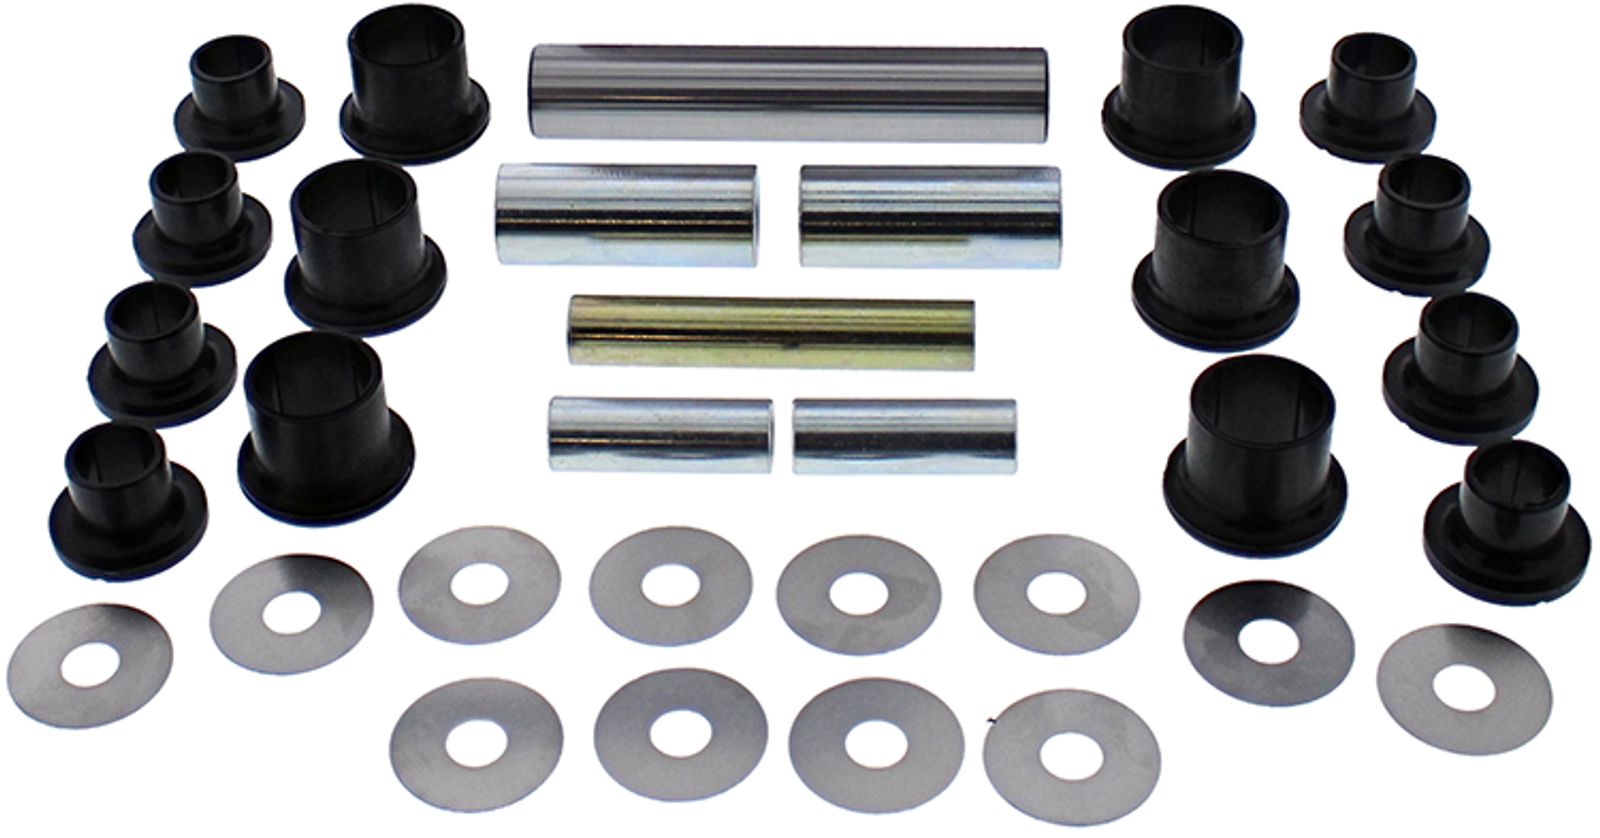 Wrp Rear Ind. Suspension Kits - WRP501182 image